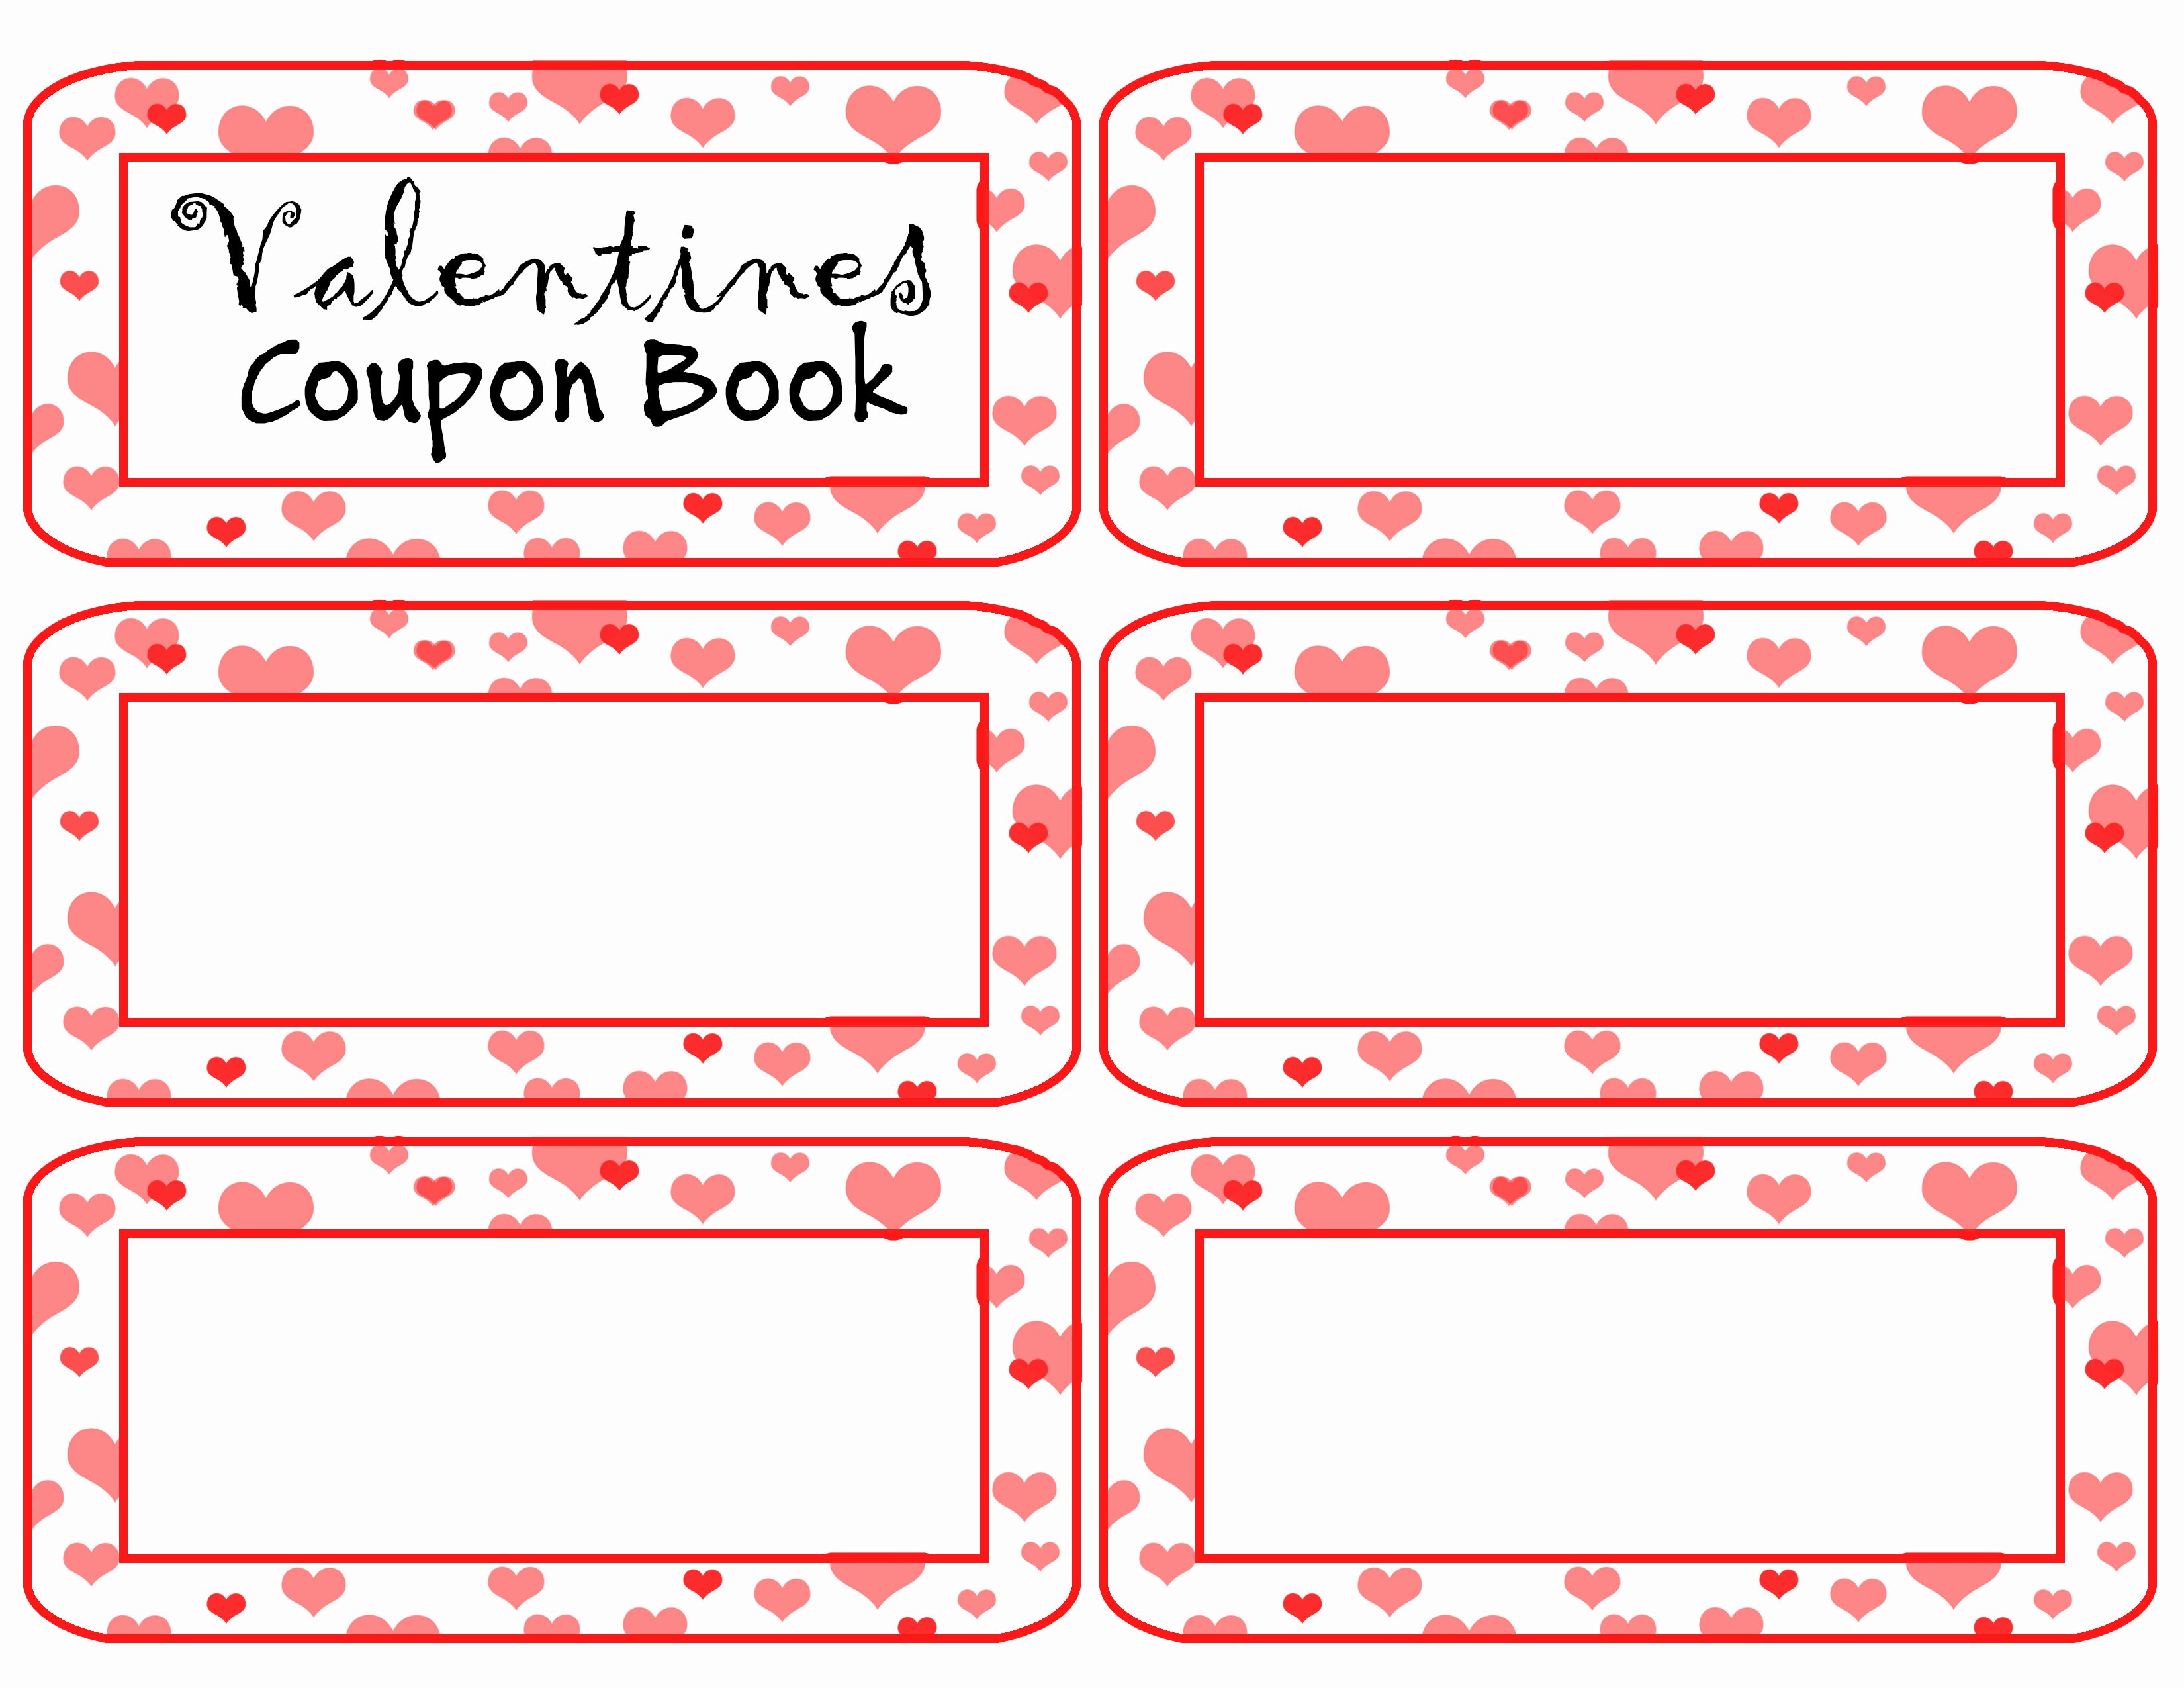 Coupon Book for Boyfriend Template Elegant Coupon Book Template